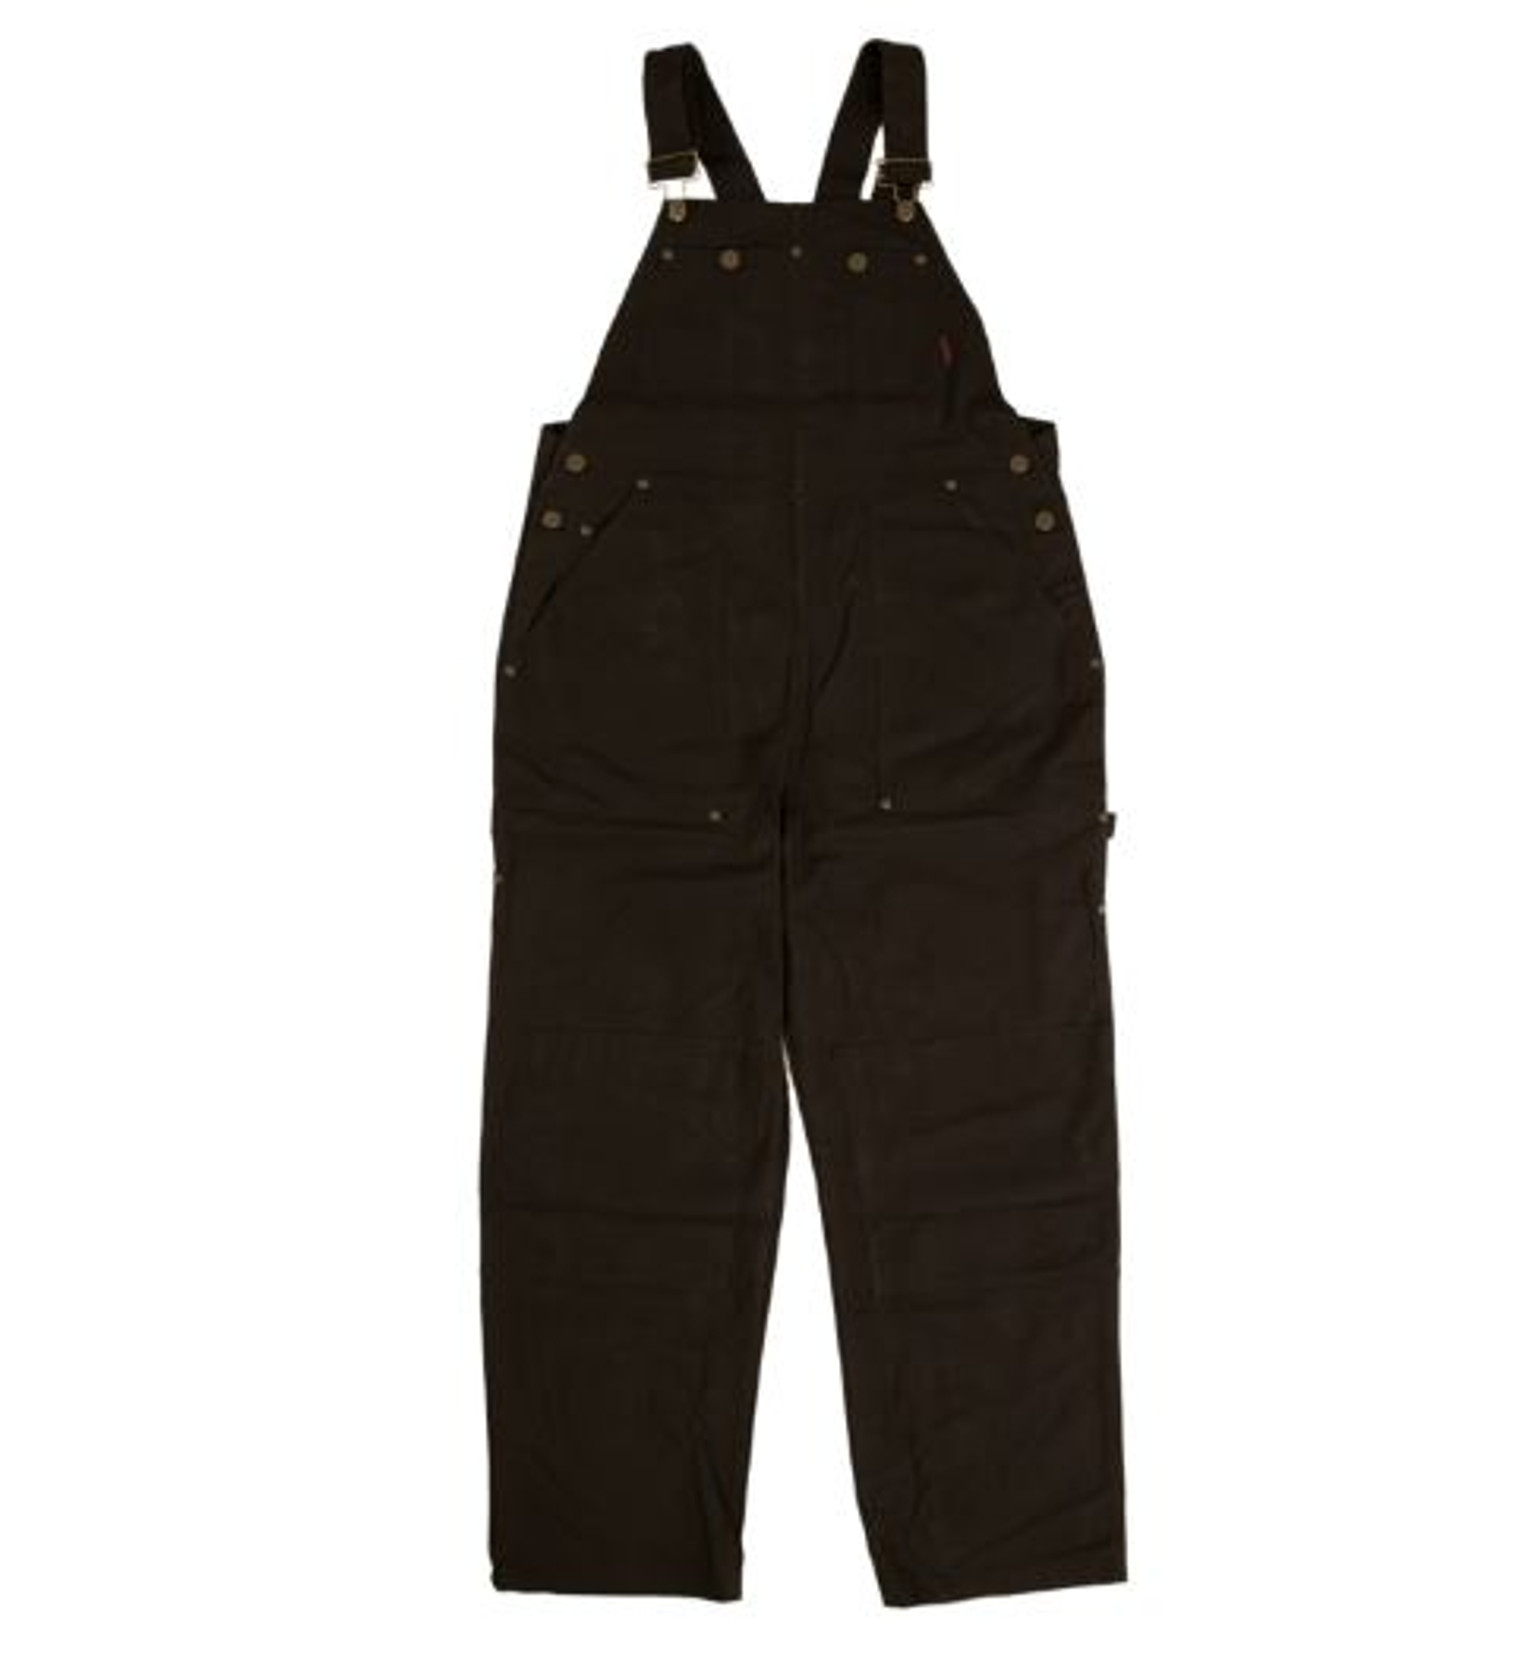 Tough Duck Deluxe Unlined Bib Overall